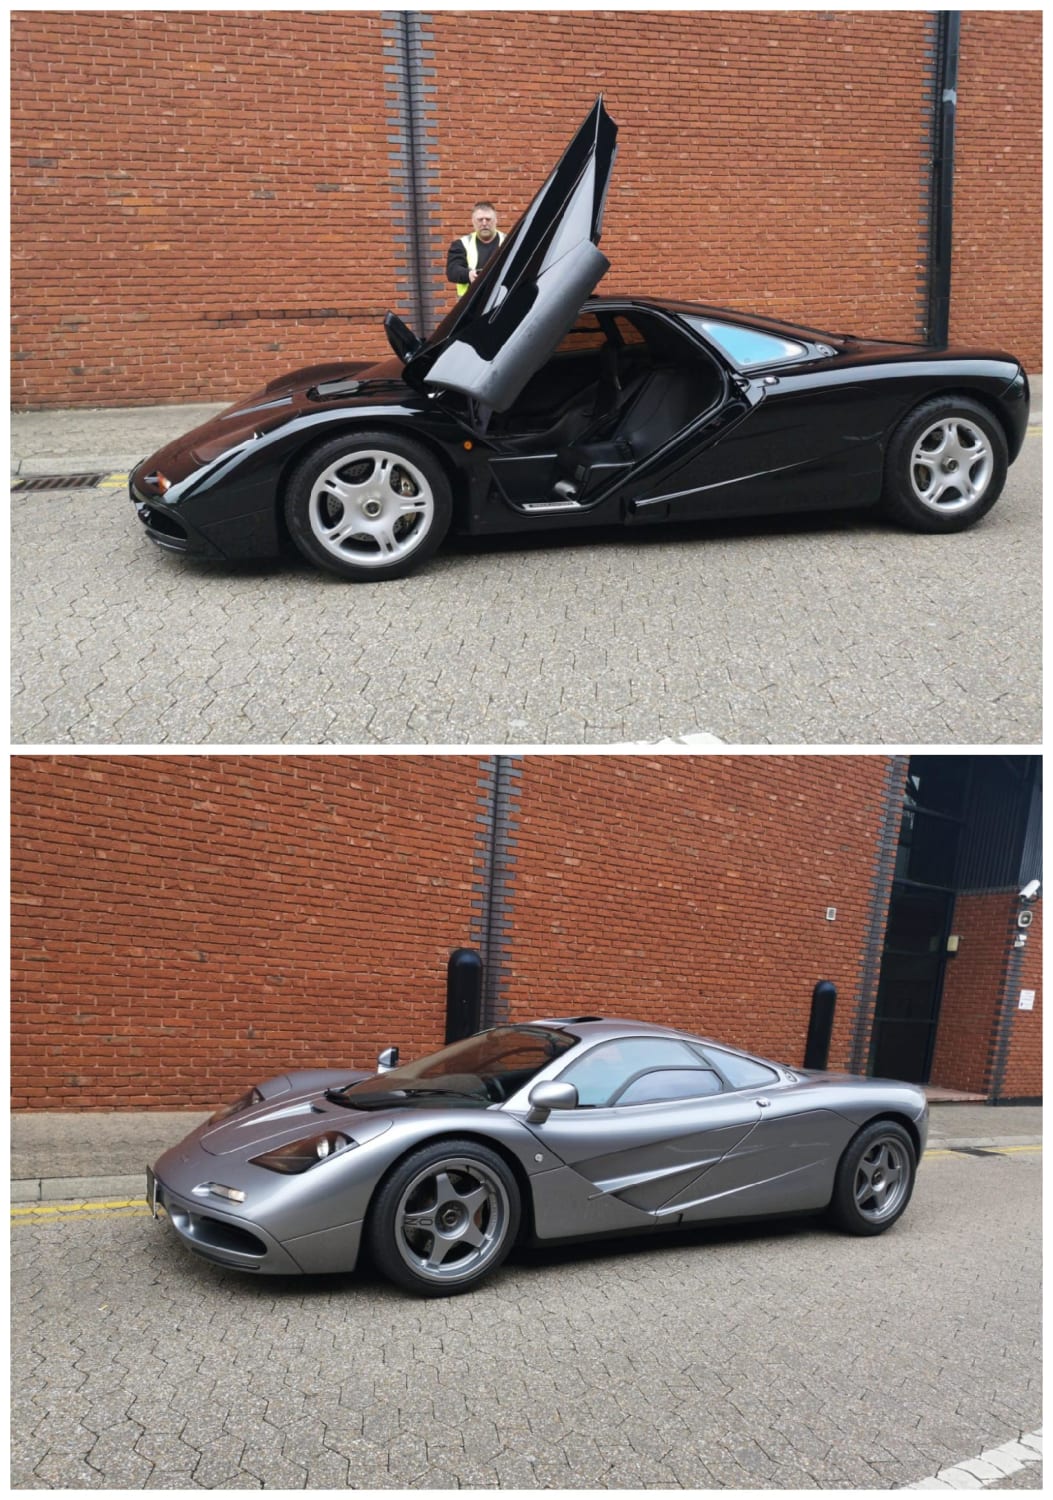 Two McLaren F1s on the same day, I'm in shock